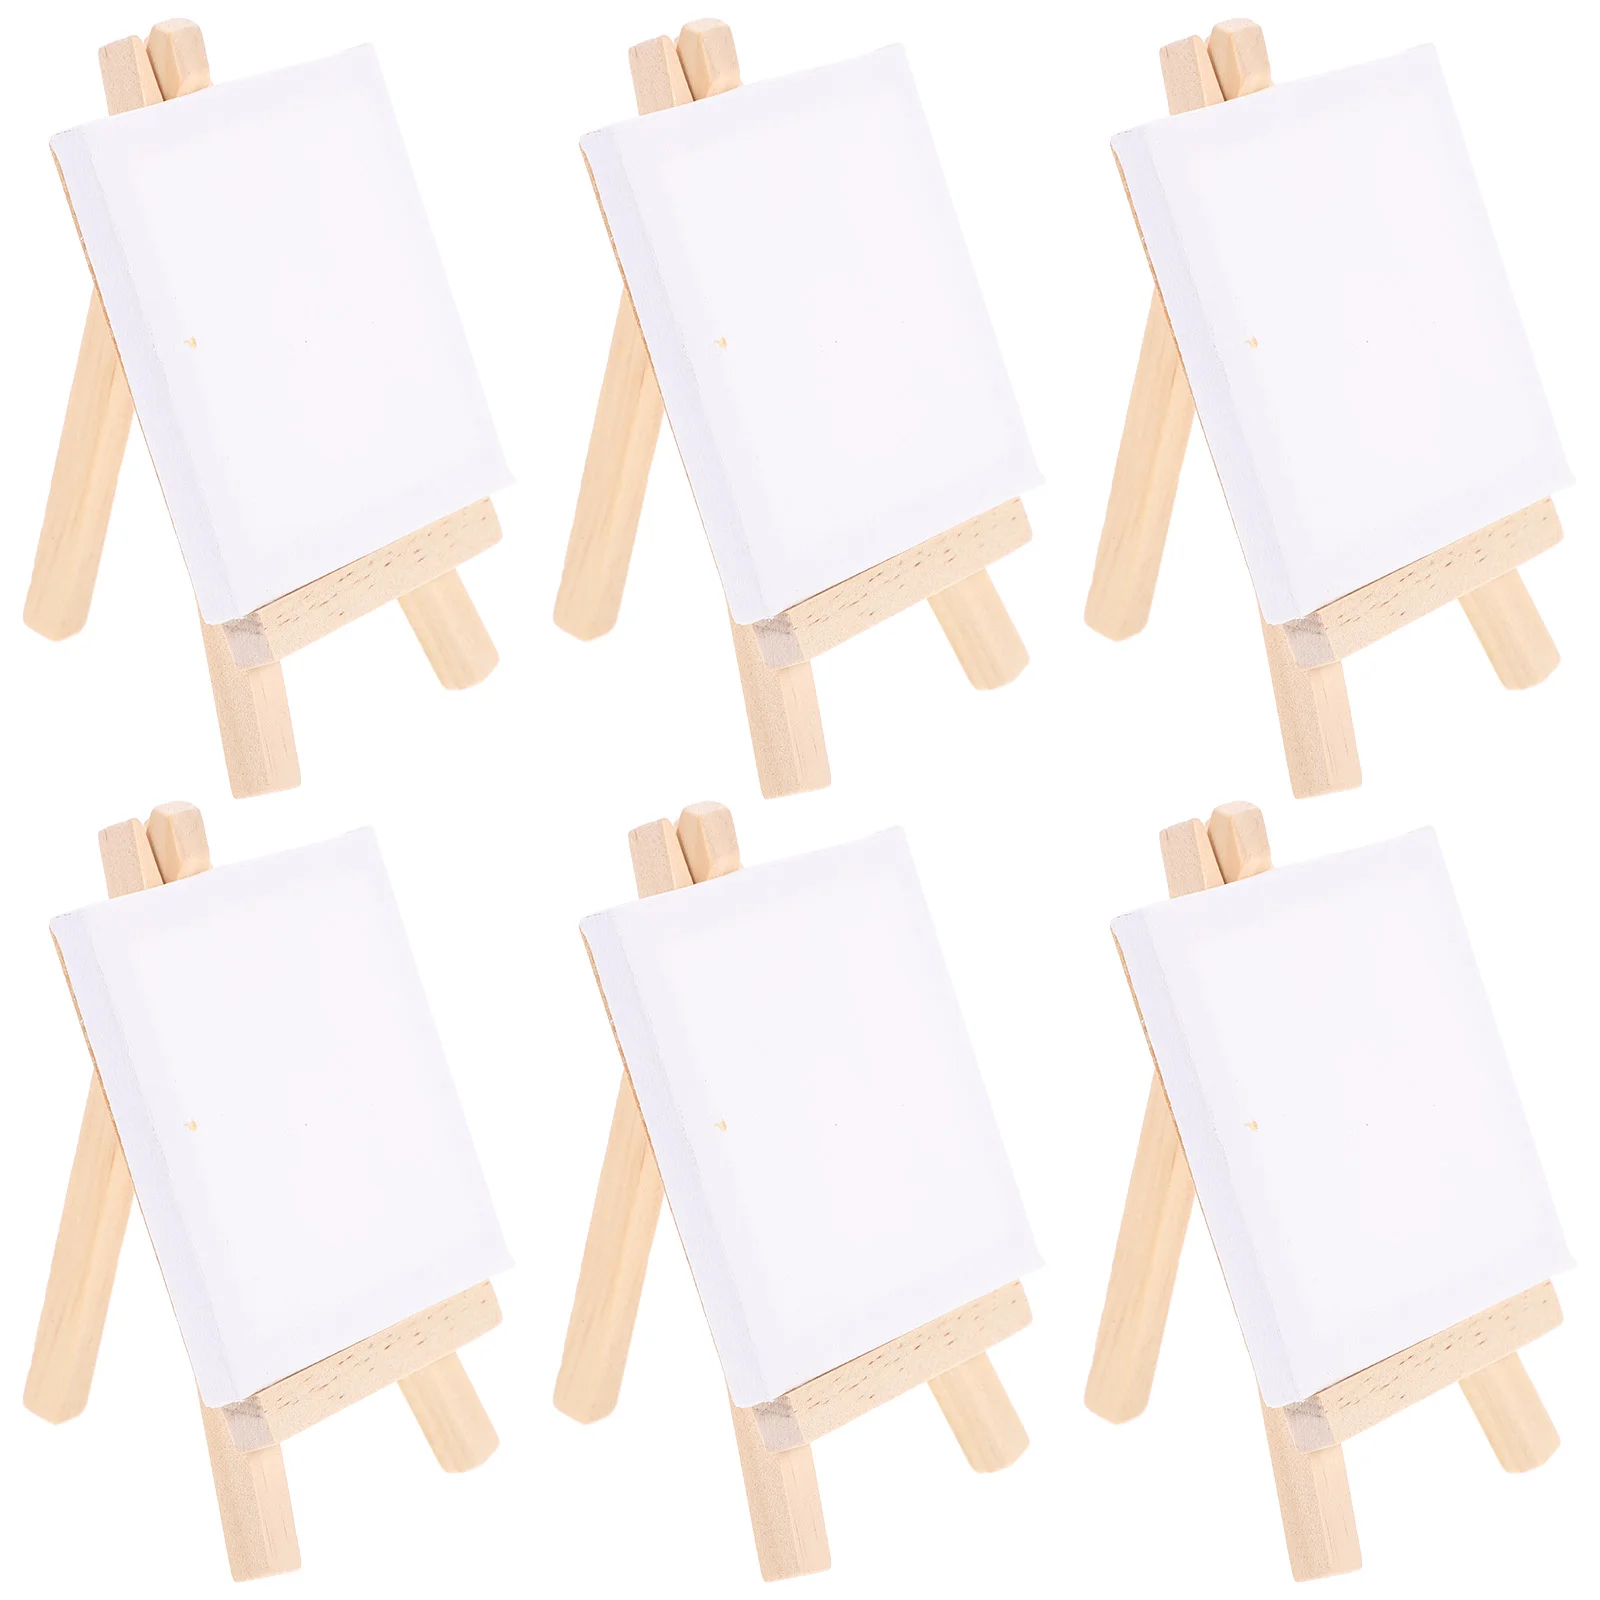 14Pcs Mini Canvas And Easel Brush Set, Canvas 4X4 Inch, Pre-Stretched Canvas,  Mini Painting Kit, Kids Painting Party